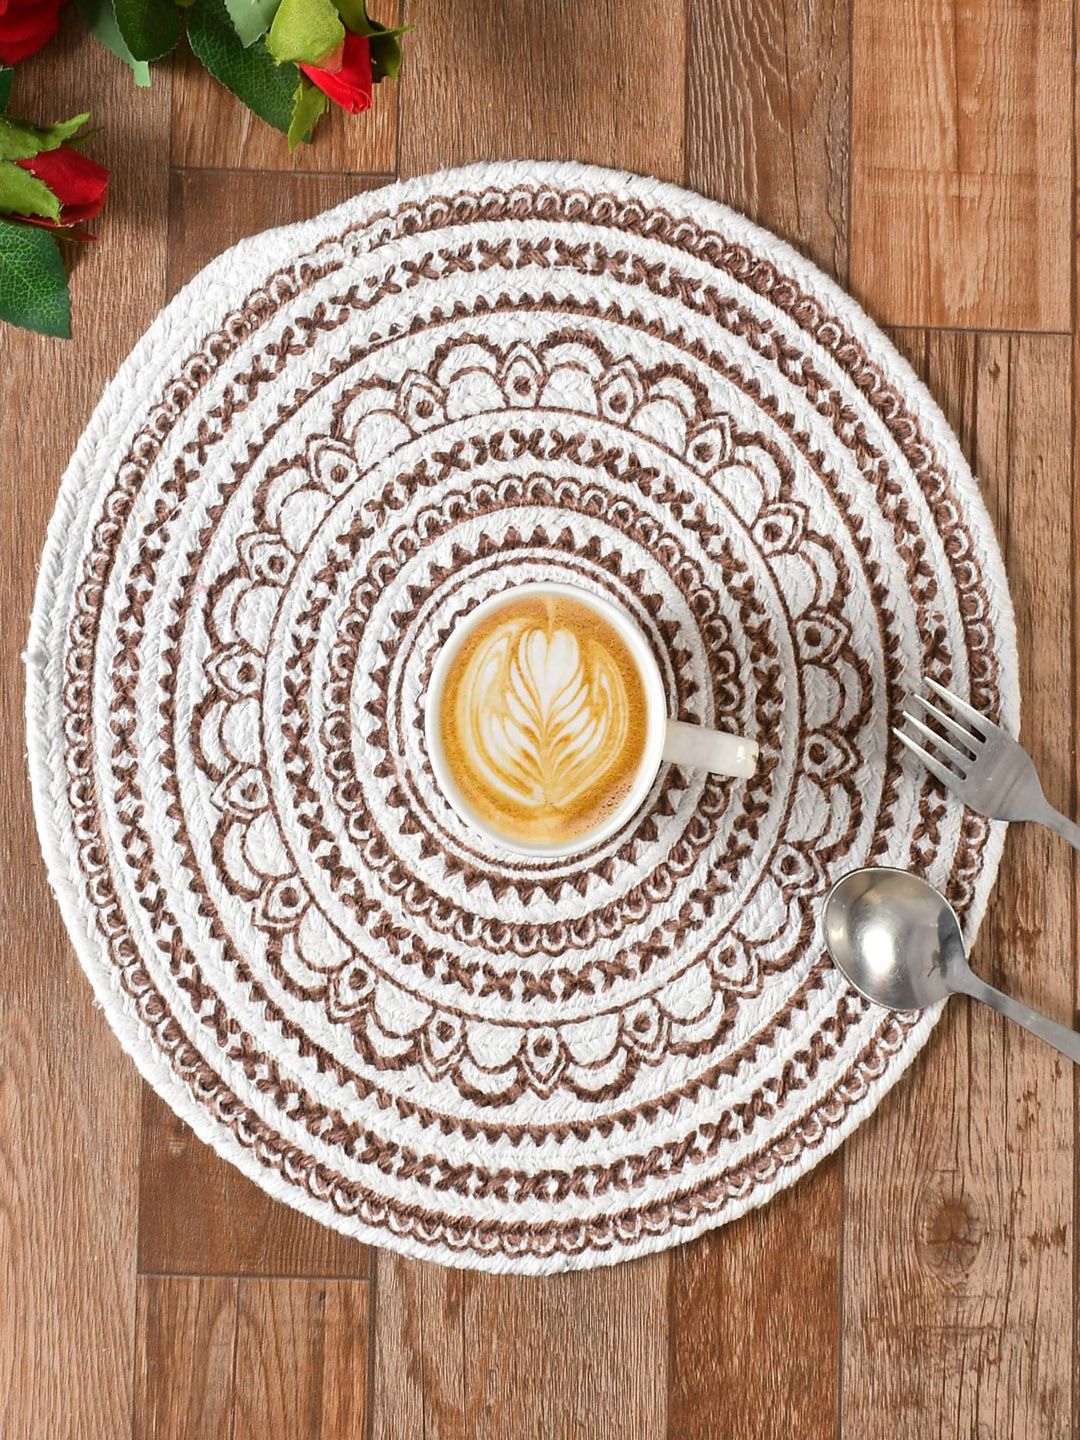 Homefab Set Of 4 Brown & White Printed Cotton Table Placemats Price in India